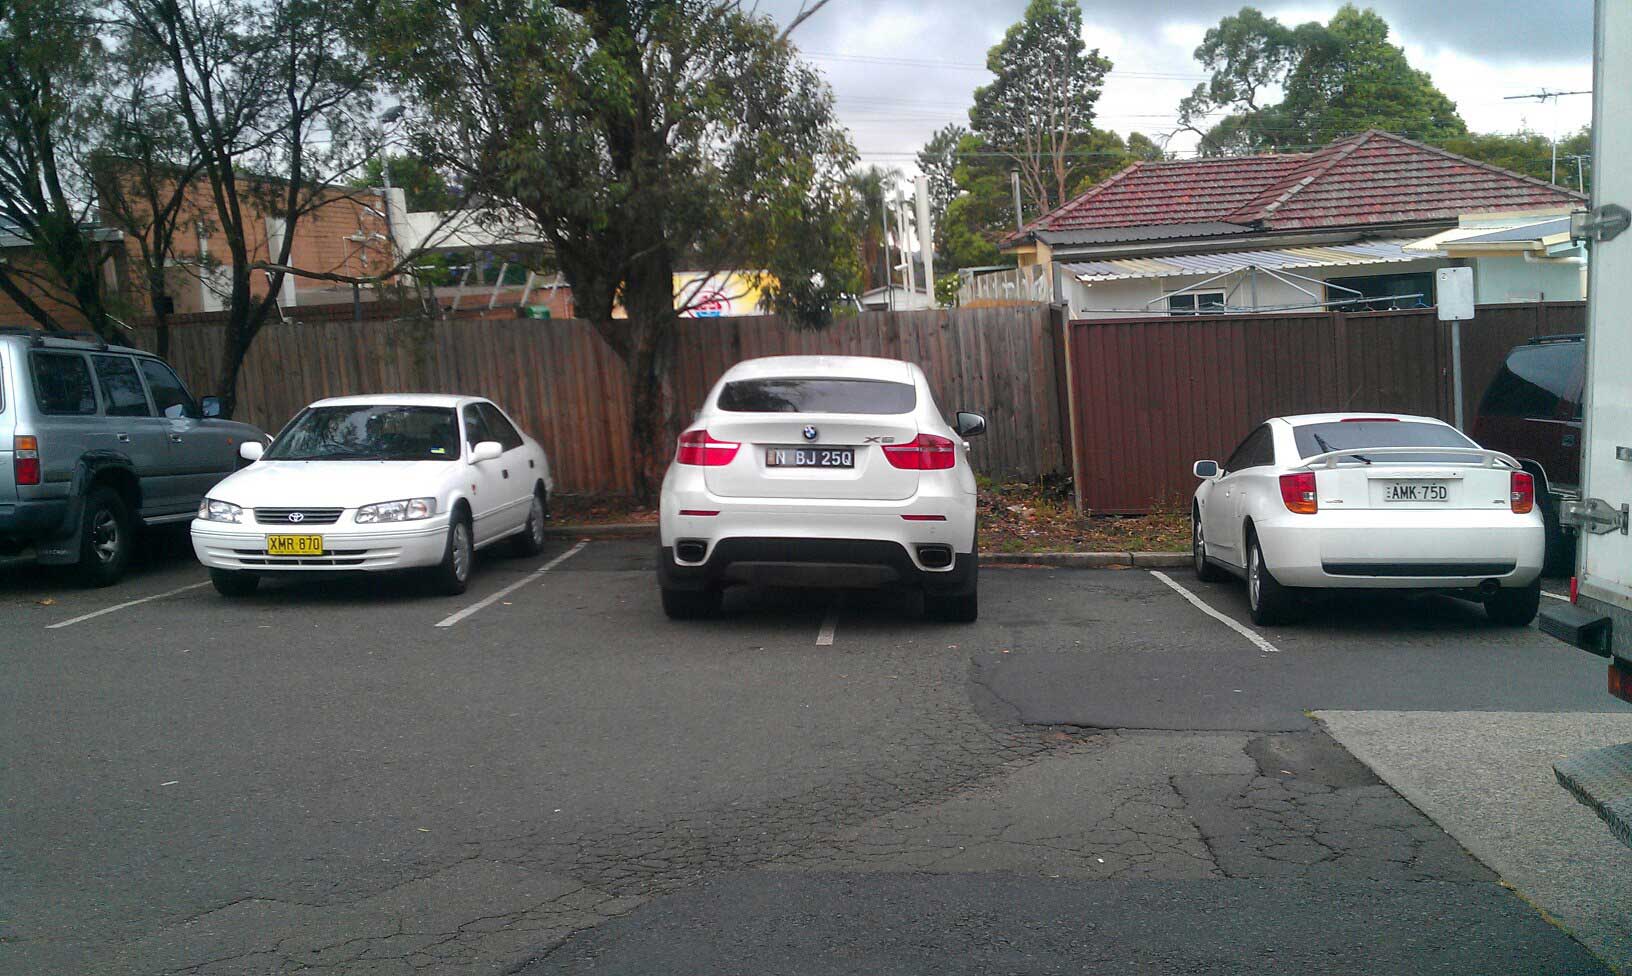 6 Types of Car Parking That Will Make You Rage